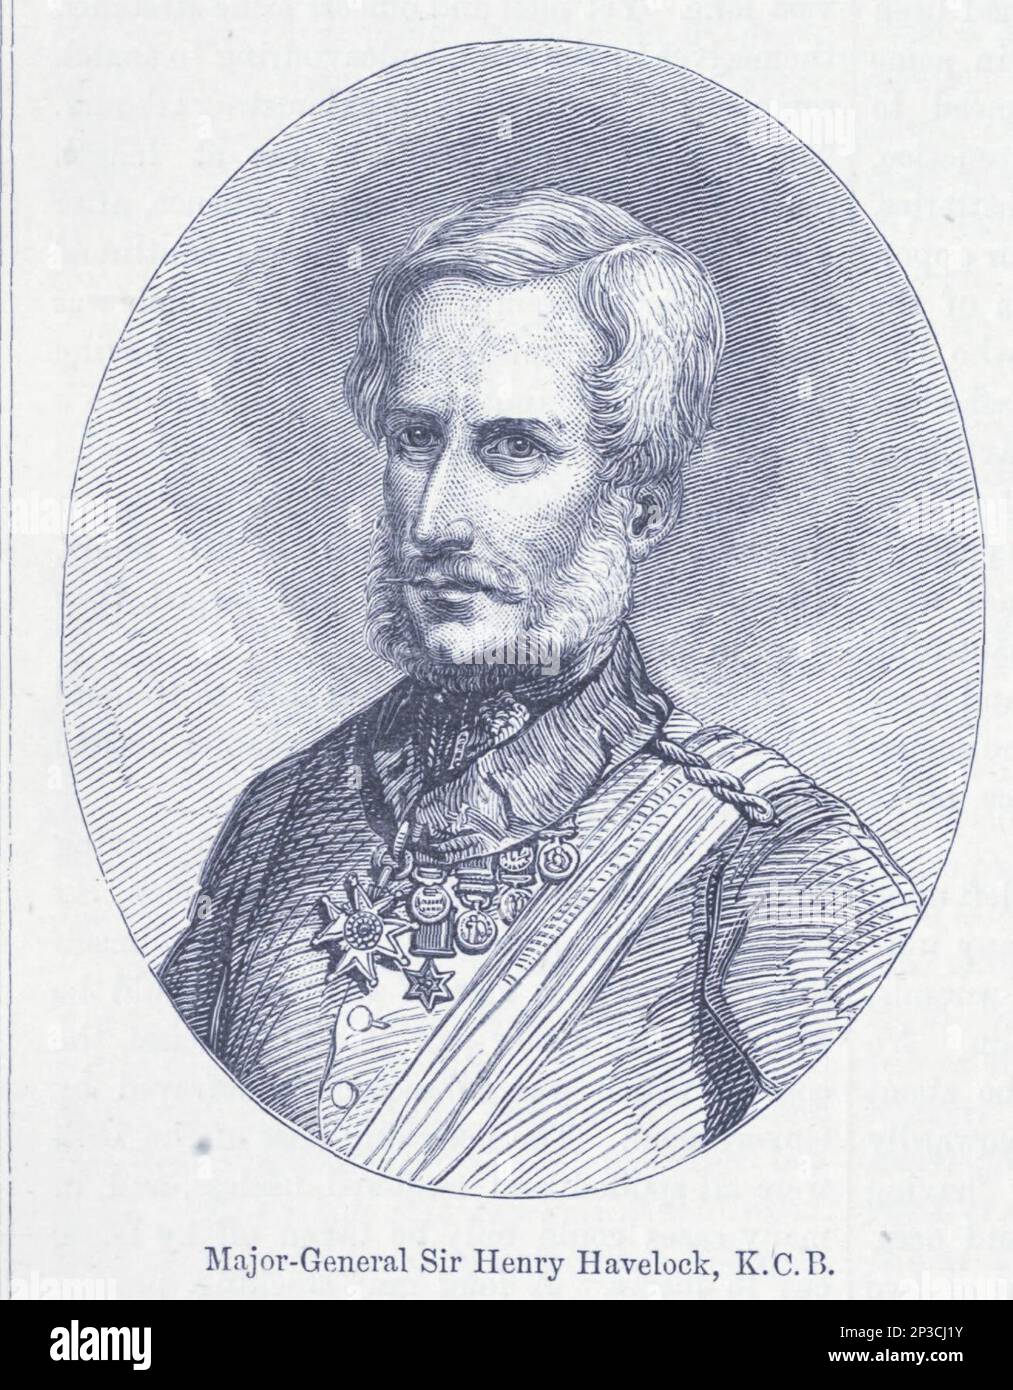 Major-General Sir Henry Havelock KCB (5 April 1795 – 24 November 1857) was a British general who is particularly associated with India and his recapture of Cawnpore during the Indian Rebellion of 1857 (First War of Independence, Sepoy Mutiny). from the book ' A history of the Scottish Highlands, Highland clans and Highland regiments ' Volume 2 by Maclauchlan, Thomas, 1816-1886; Wilson, John, 1785-1854; Keltie, John Scott, Sir, 1840-1927 Publication date 1875 publisher Edinburgh ; London : A. Fullarton Stock Photo